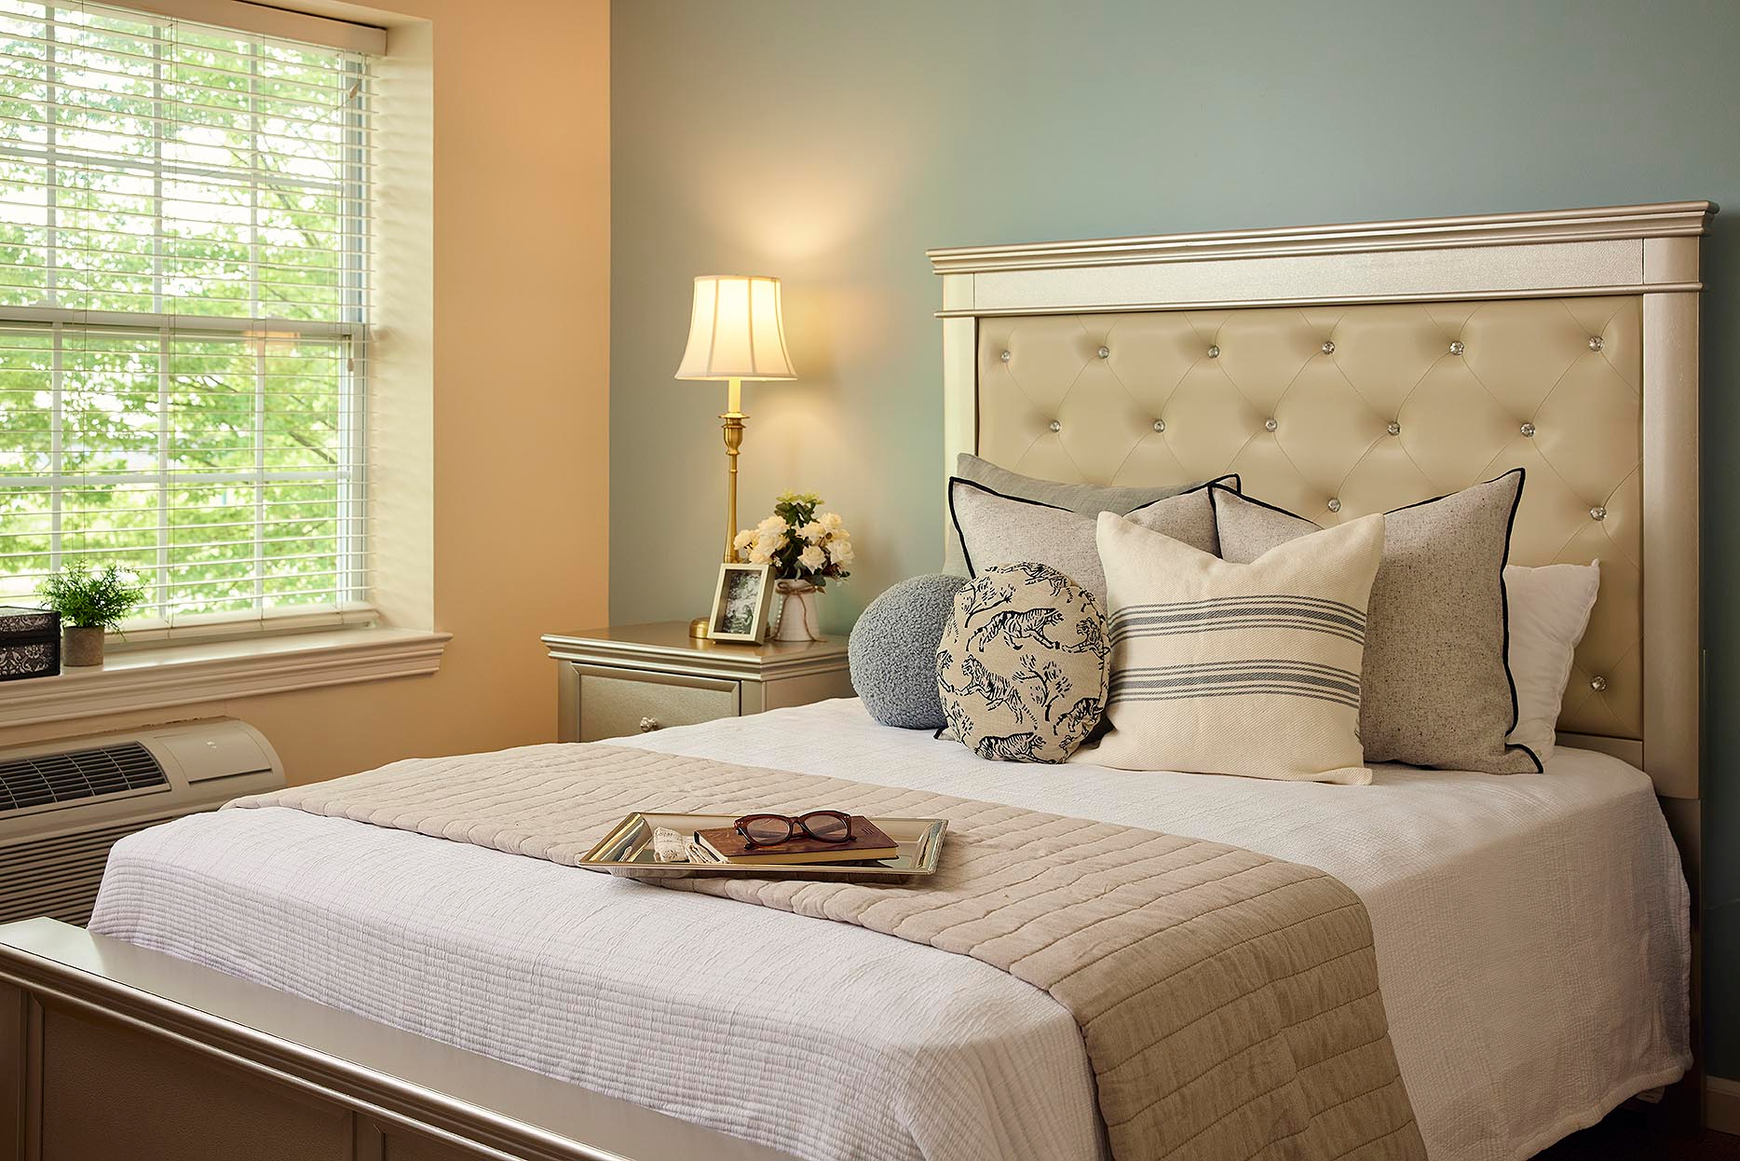 A double bed with a tufted headboard and fresh blue and white linens